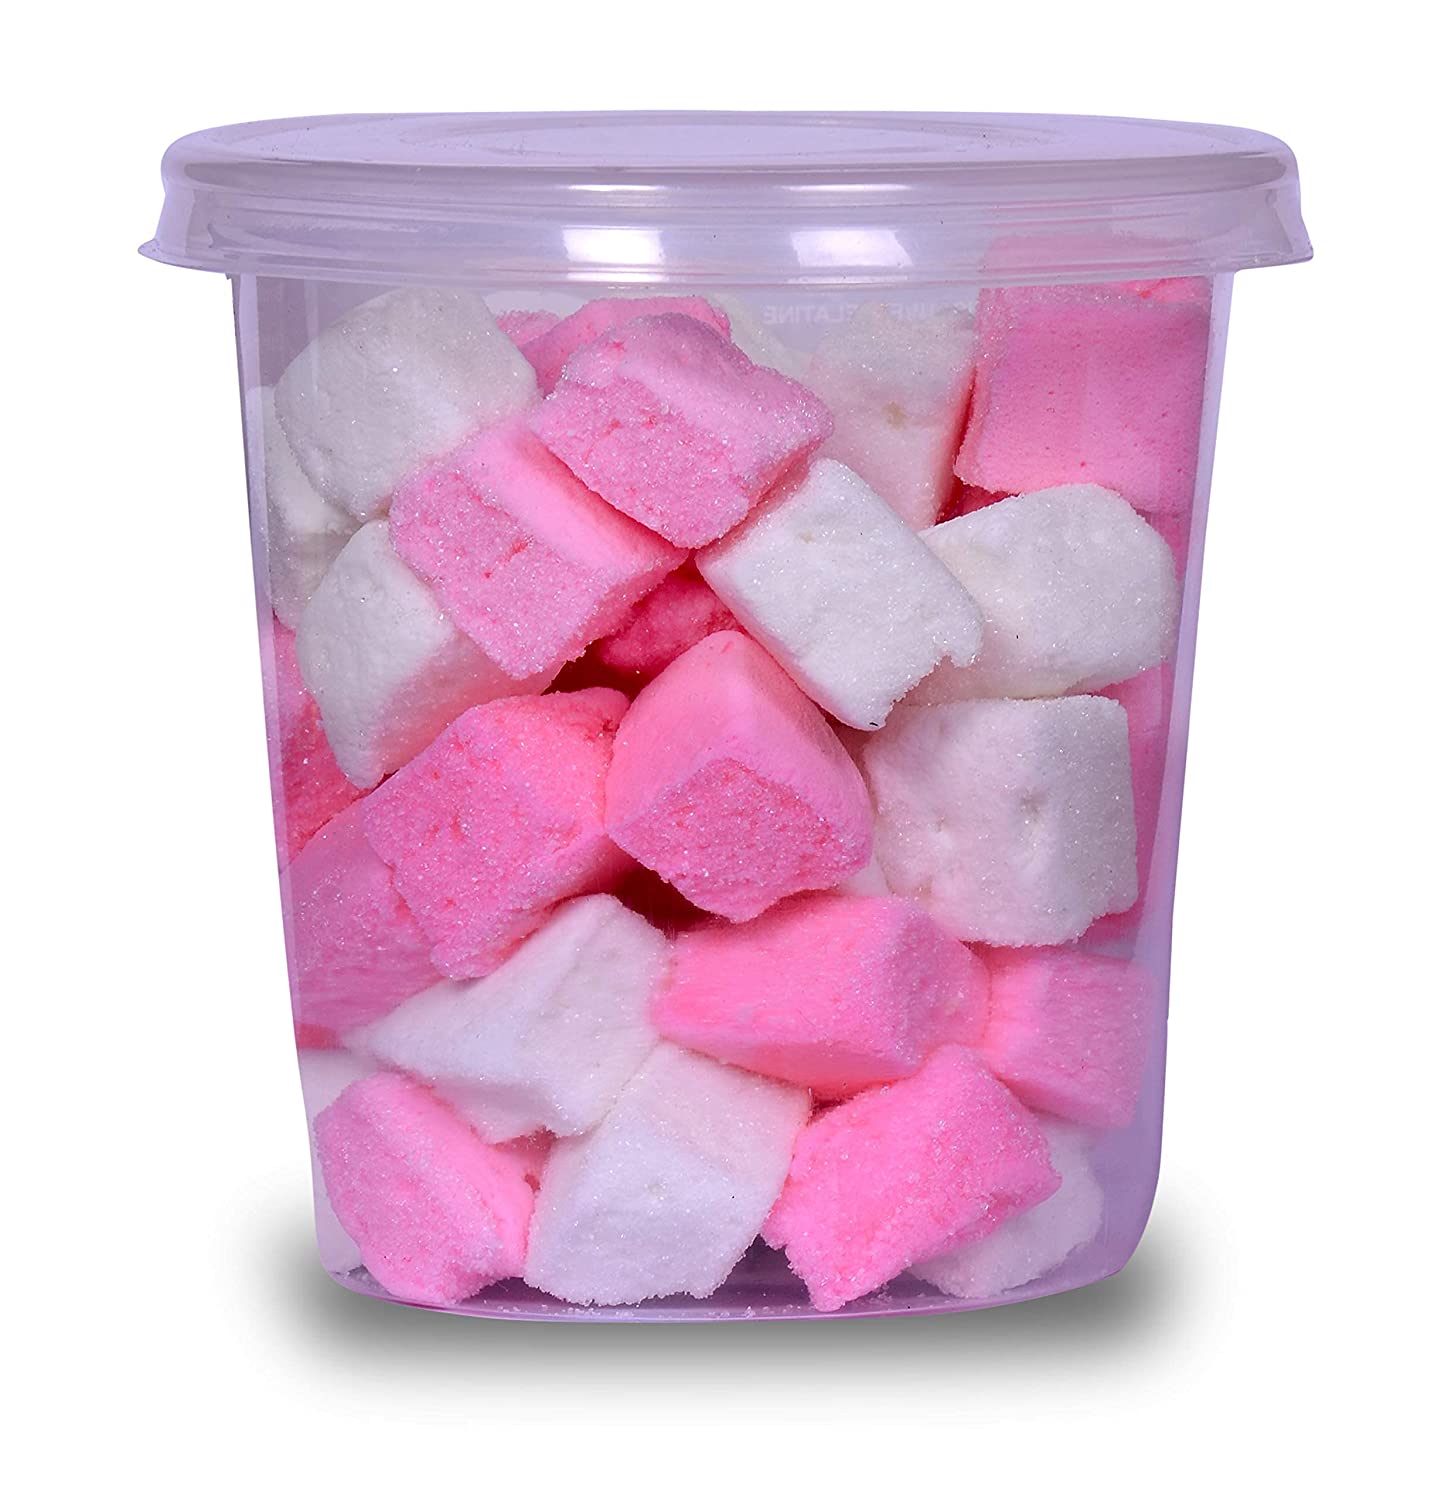 Acme Products Marshmallows Pink & White Image